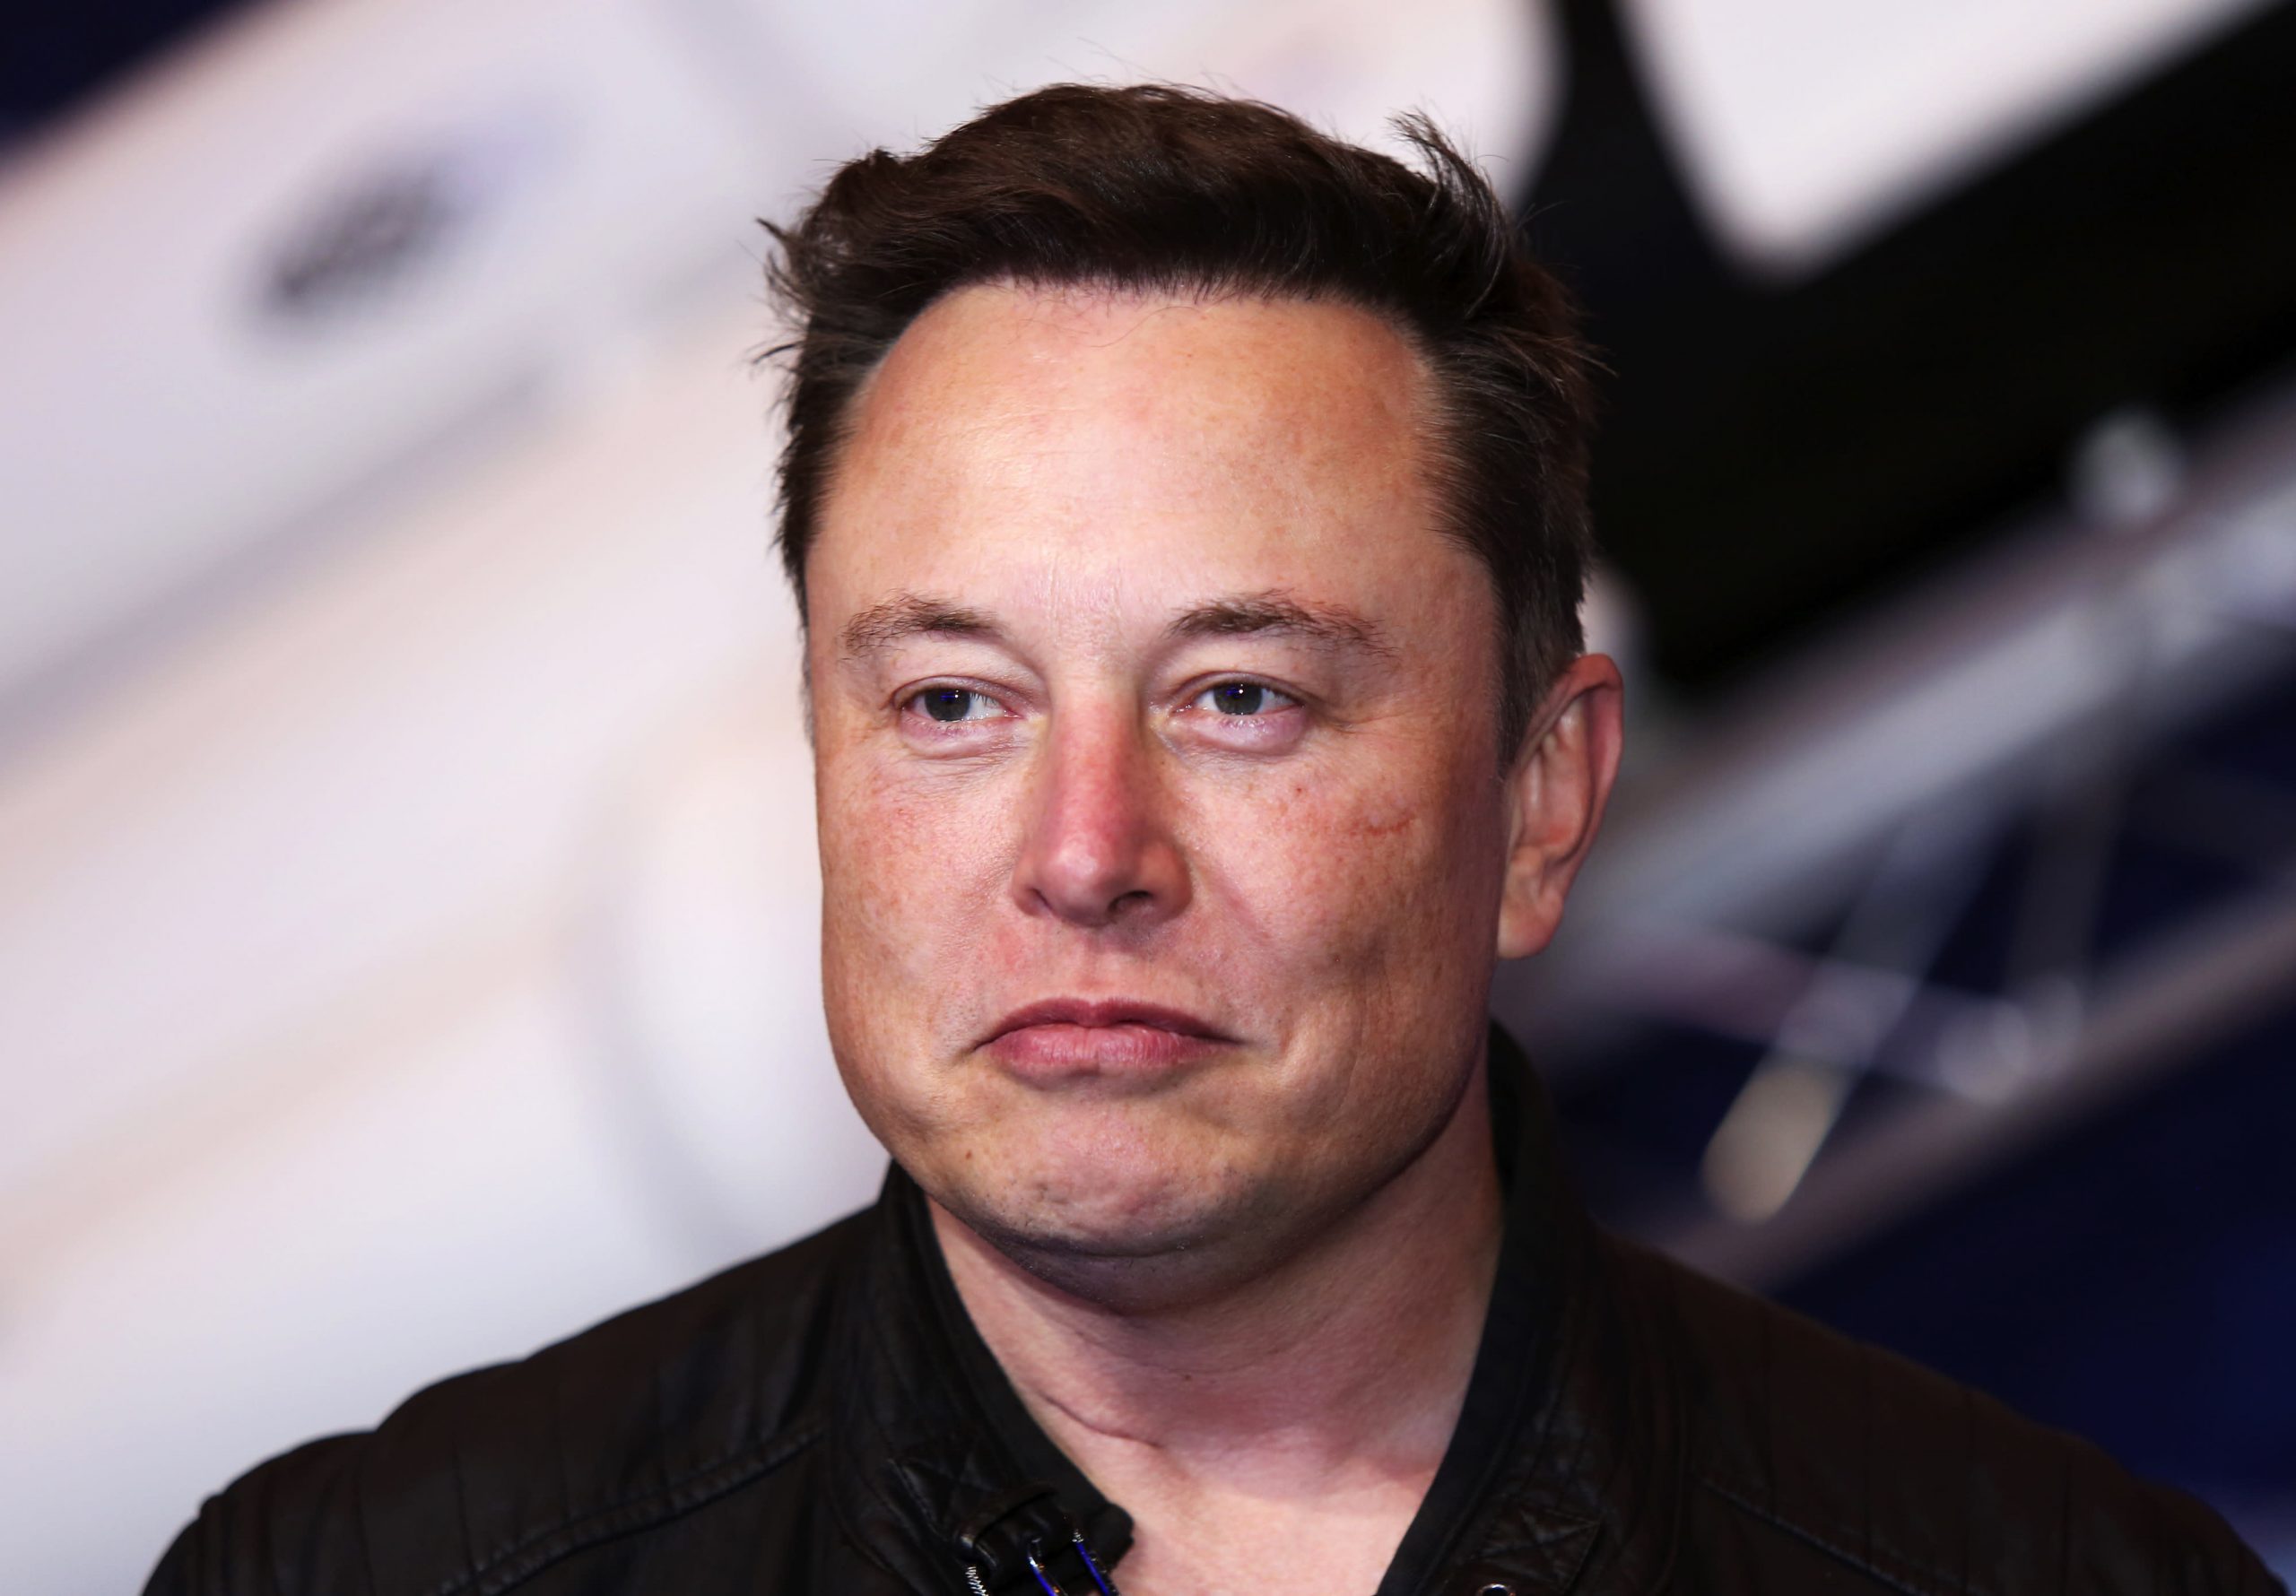 The Human Rights Council says Elon Musk should apologize for making fun of sexually explicit consciences